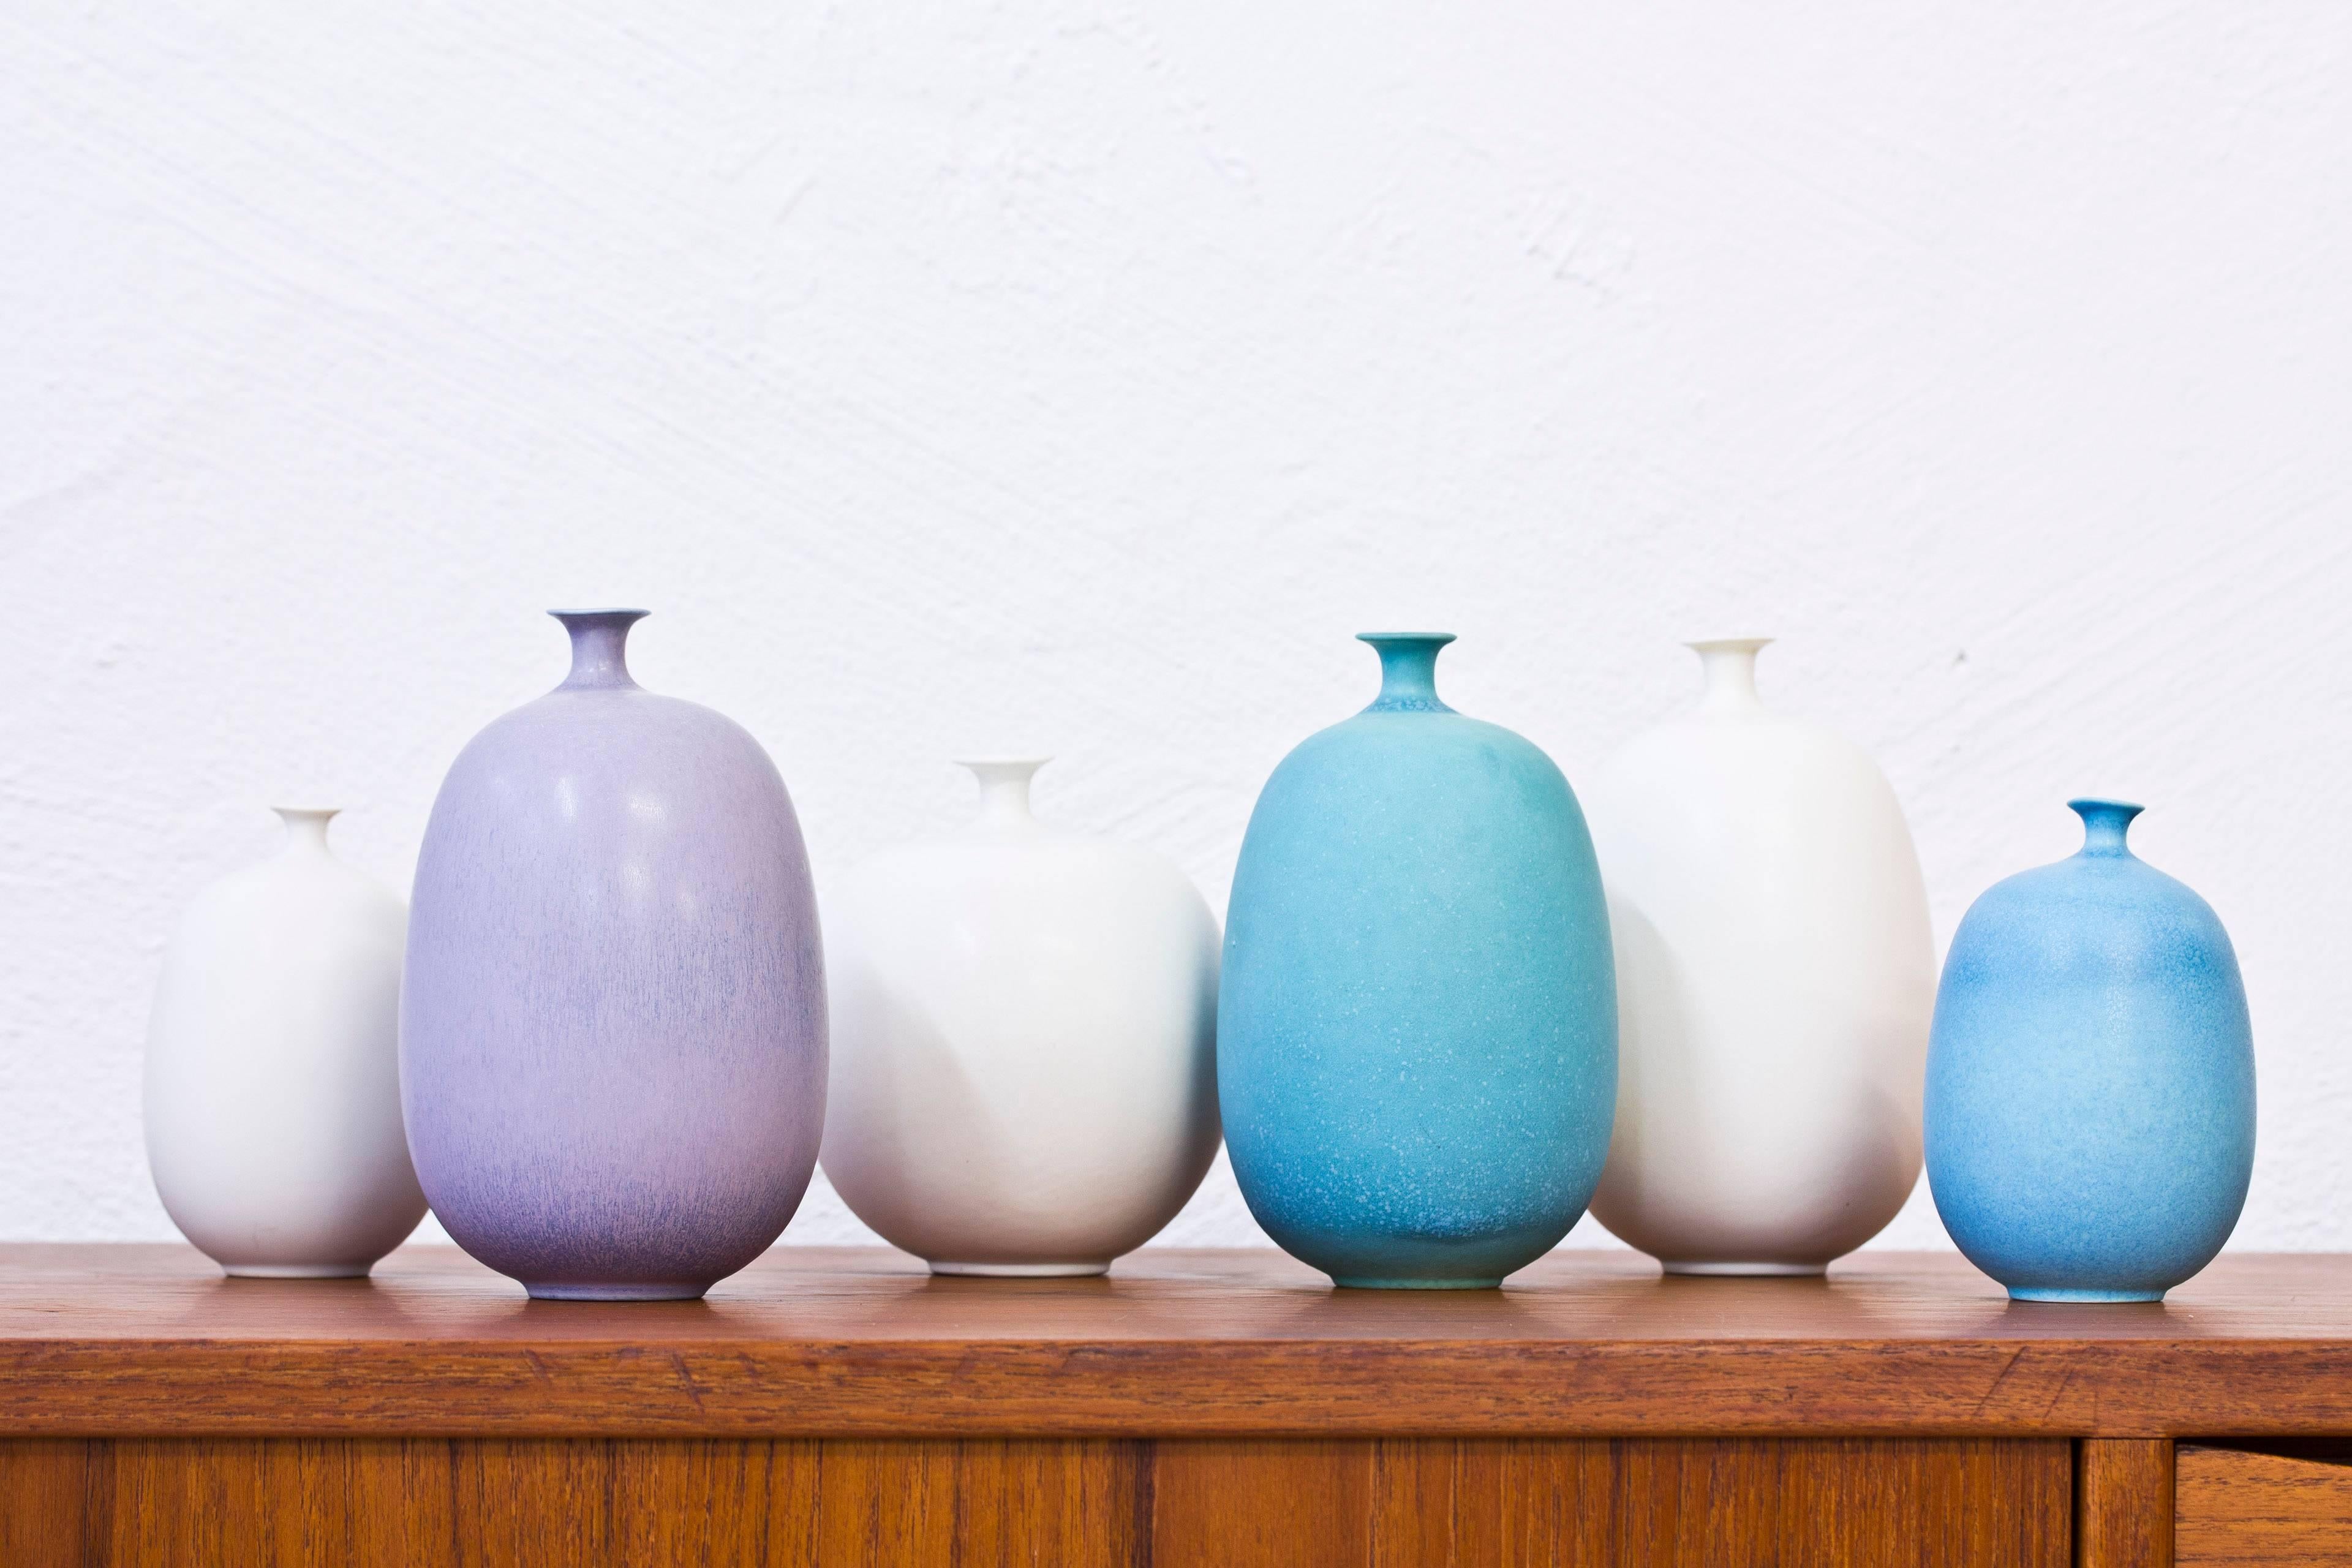 Set of six stoneware vases designed by Inger Persson.  Produced by hand at Rörstrand in Sweden. Freckled glazes in blue, green, pink and white- Signed with Rörstrand hallmark, Sweden, Three crowns and Perssons signature. Height between 12-16.5 cm.